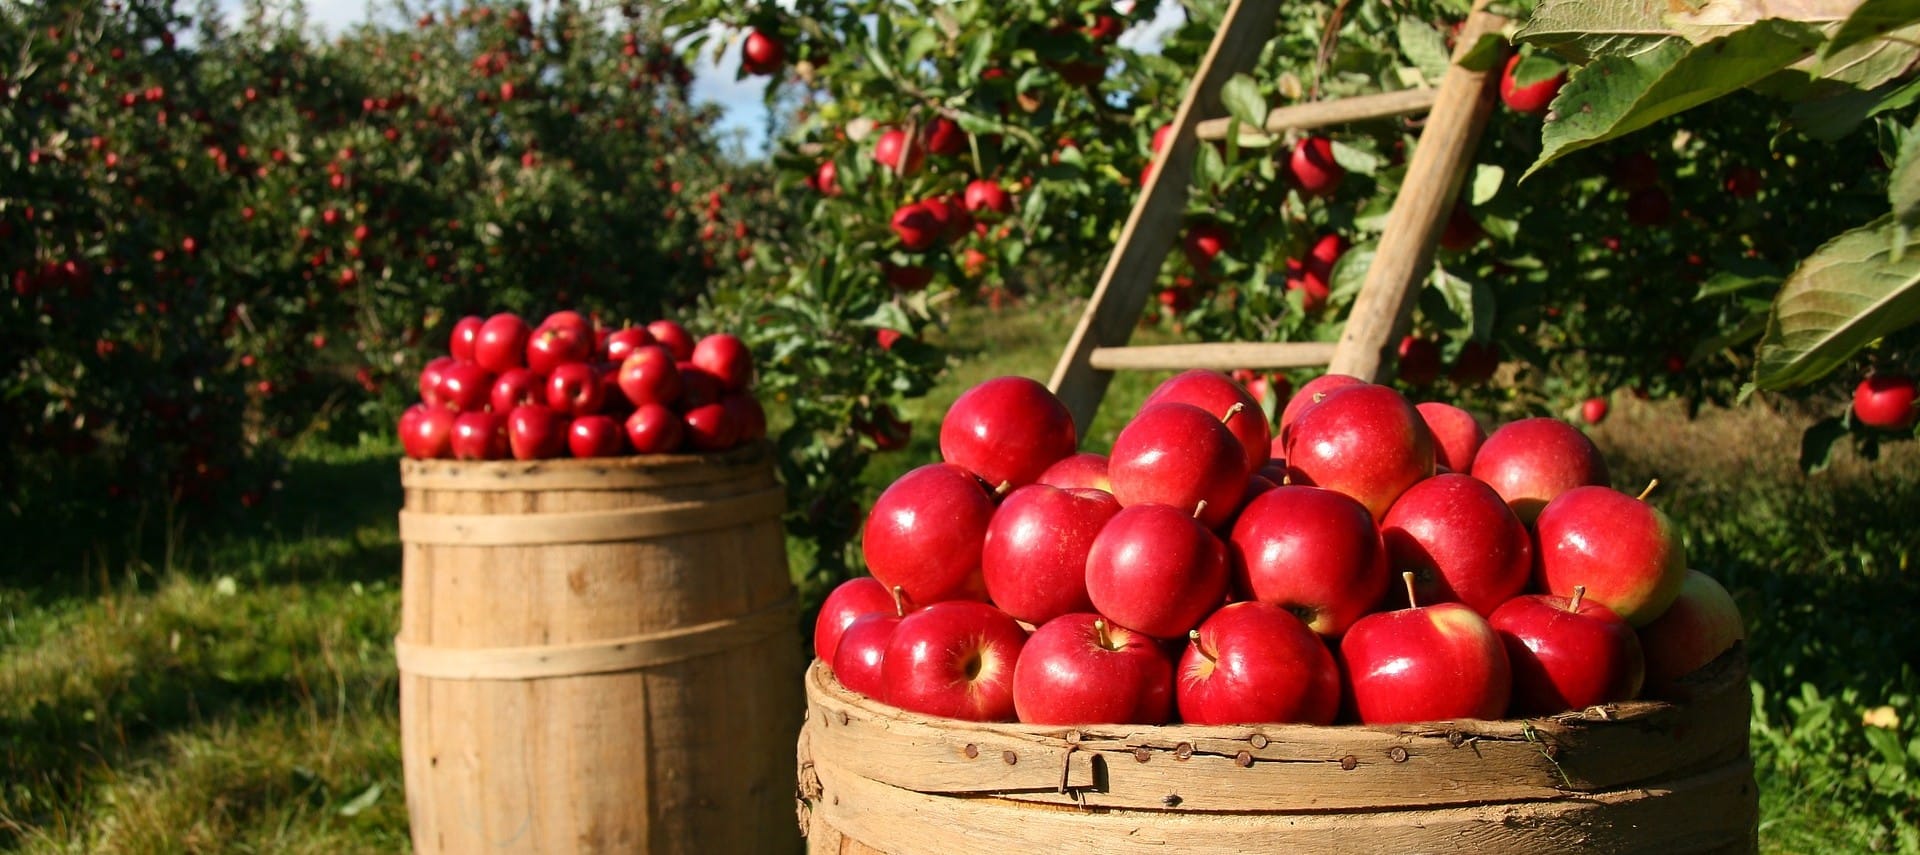 Two large brown barrels full of red apples next to orchard trees full of apples